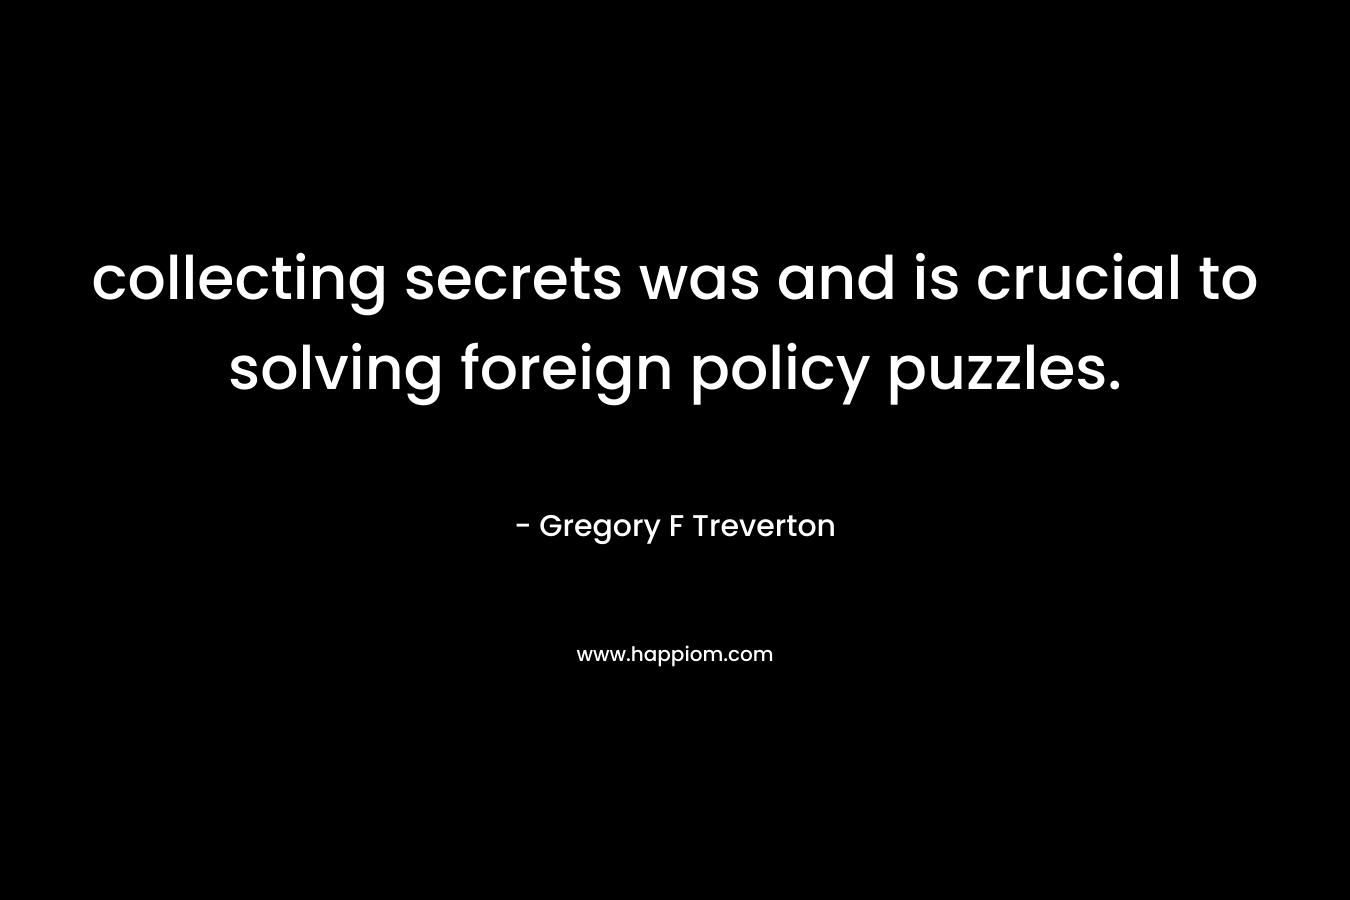 collecting secrets was and is crucial to solving foreign policy puzzles.